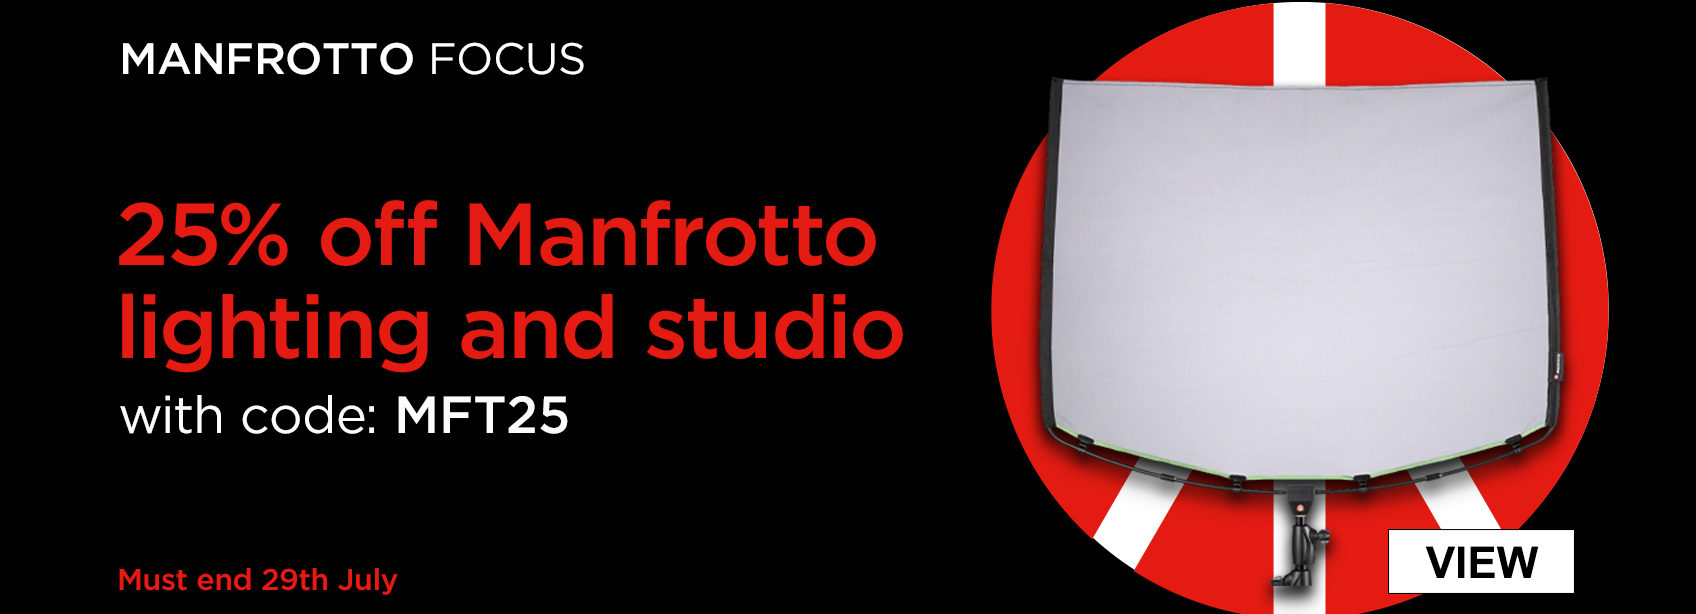 25% off Manfrotto Lighting and Studio with code MFT25